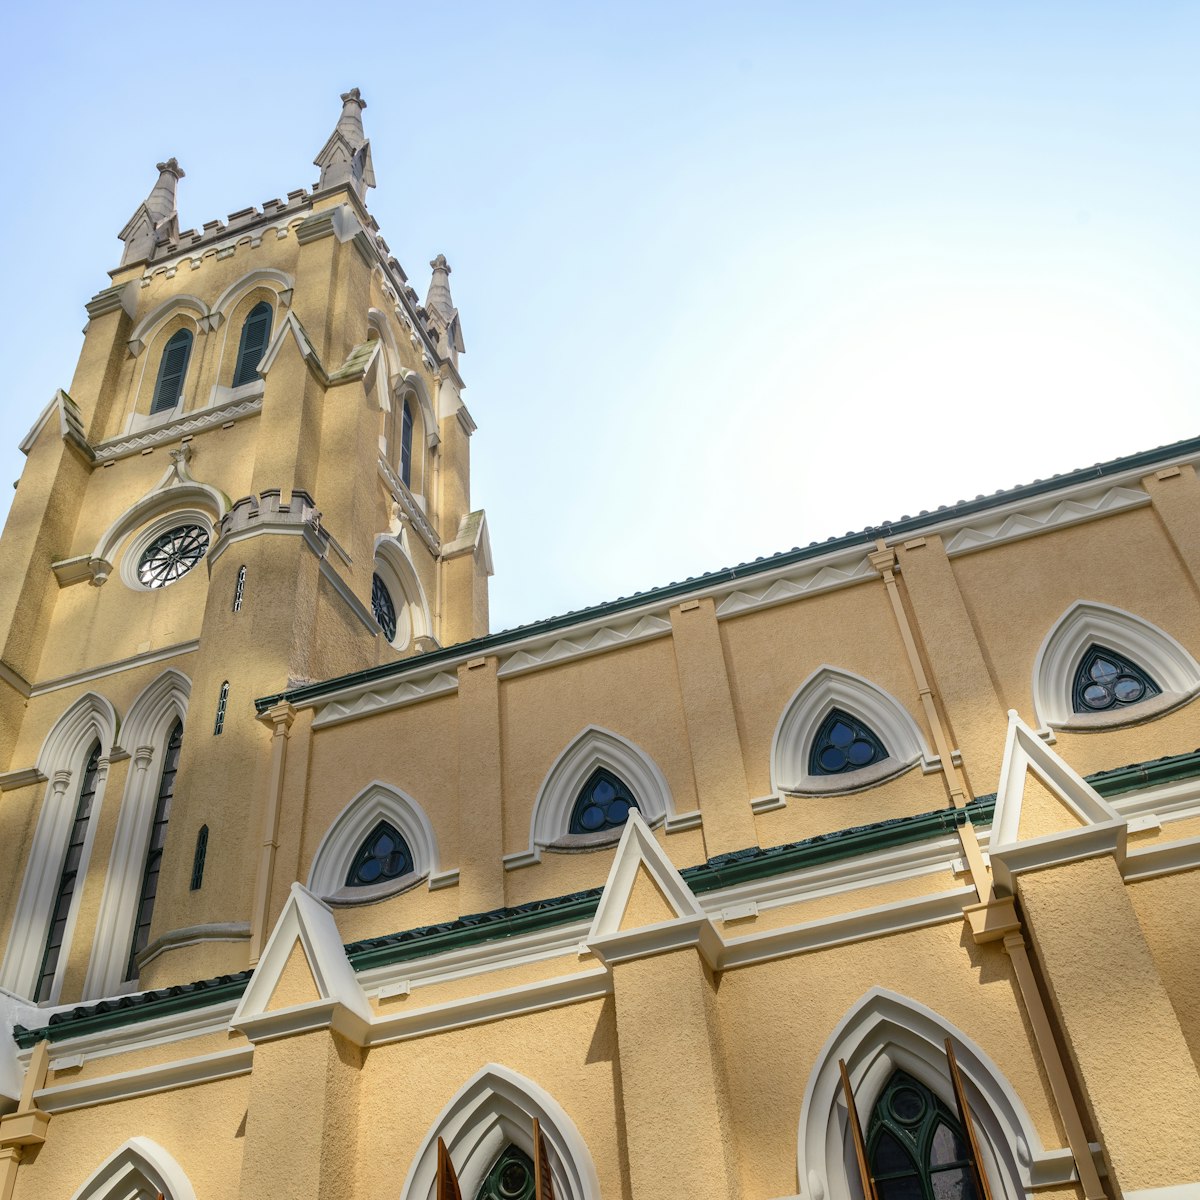 St. John's Cathedral is the first established christian churches in Hong Kong,built in 1849.; Shutterstock ID 166540409; Your name (First / Last): Josh Vogel; Project no. or GL code: 56530; Network activity no. or Cost Centre: Online-Design; Product or Project: 65050/7529/Josh Vogel/LP.com Destination Galleries